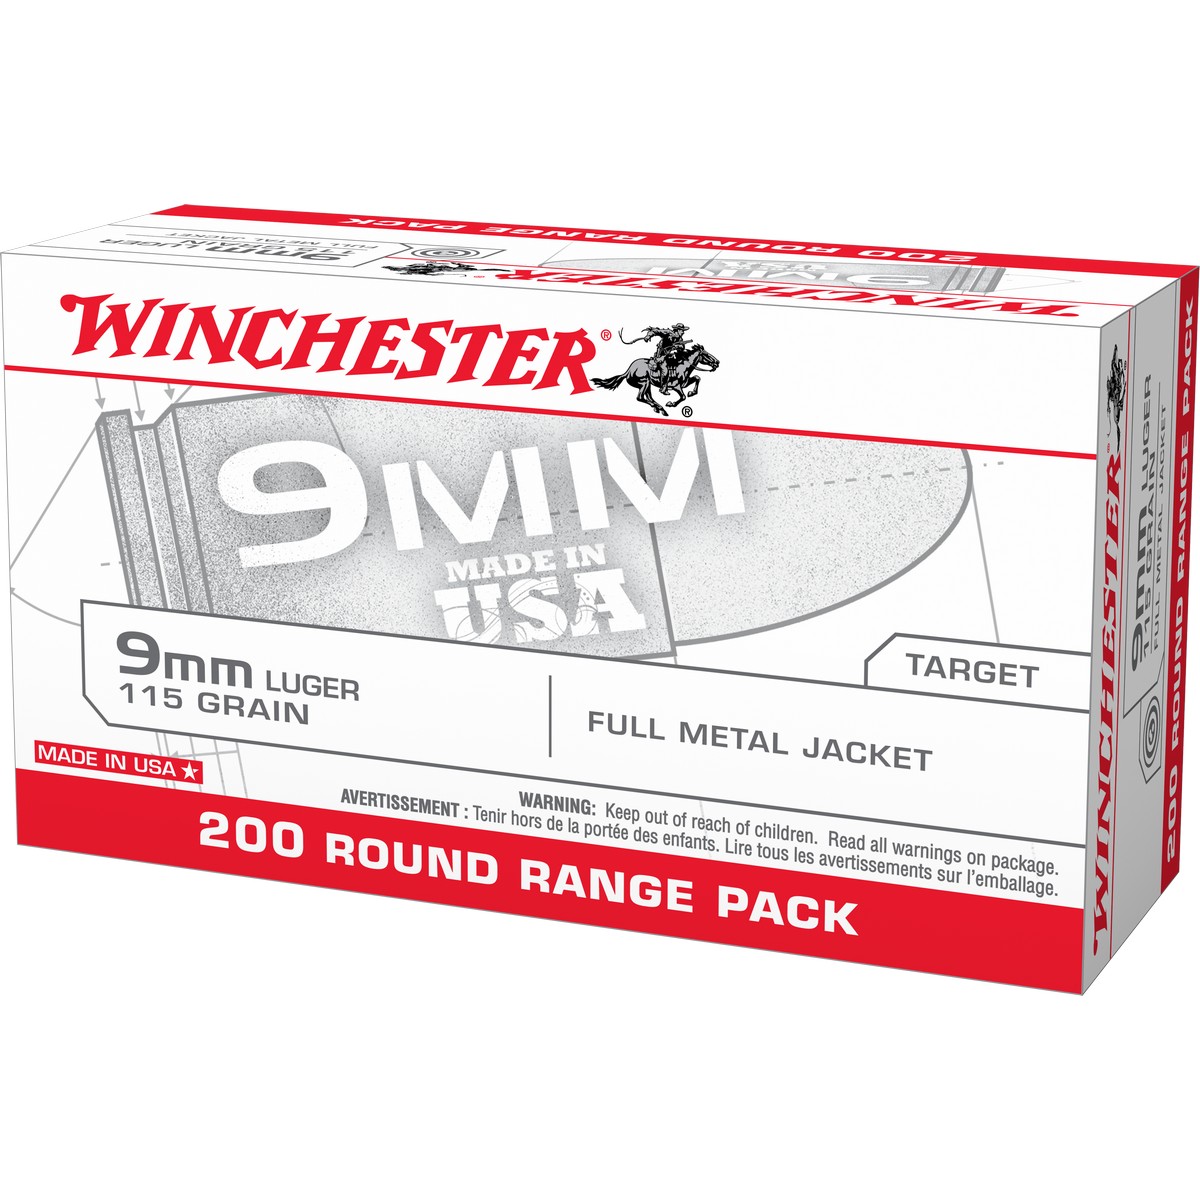 chester USA 9mm 115 Gr FMJ 200 Rd Ammo